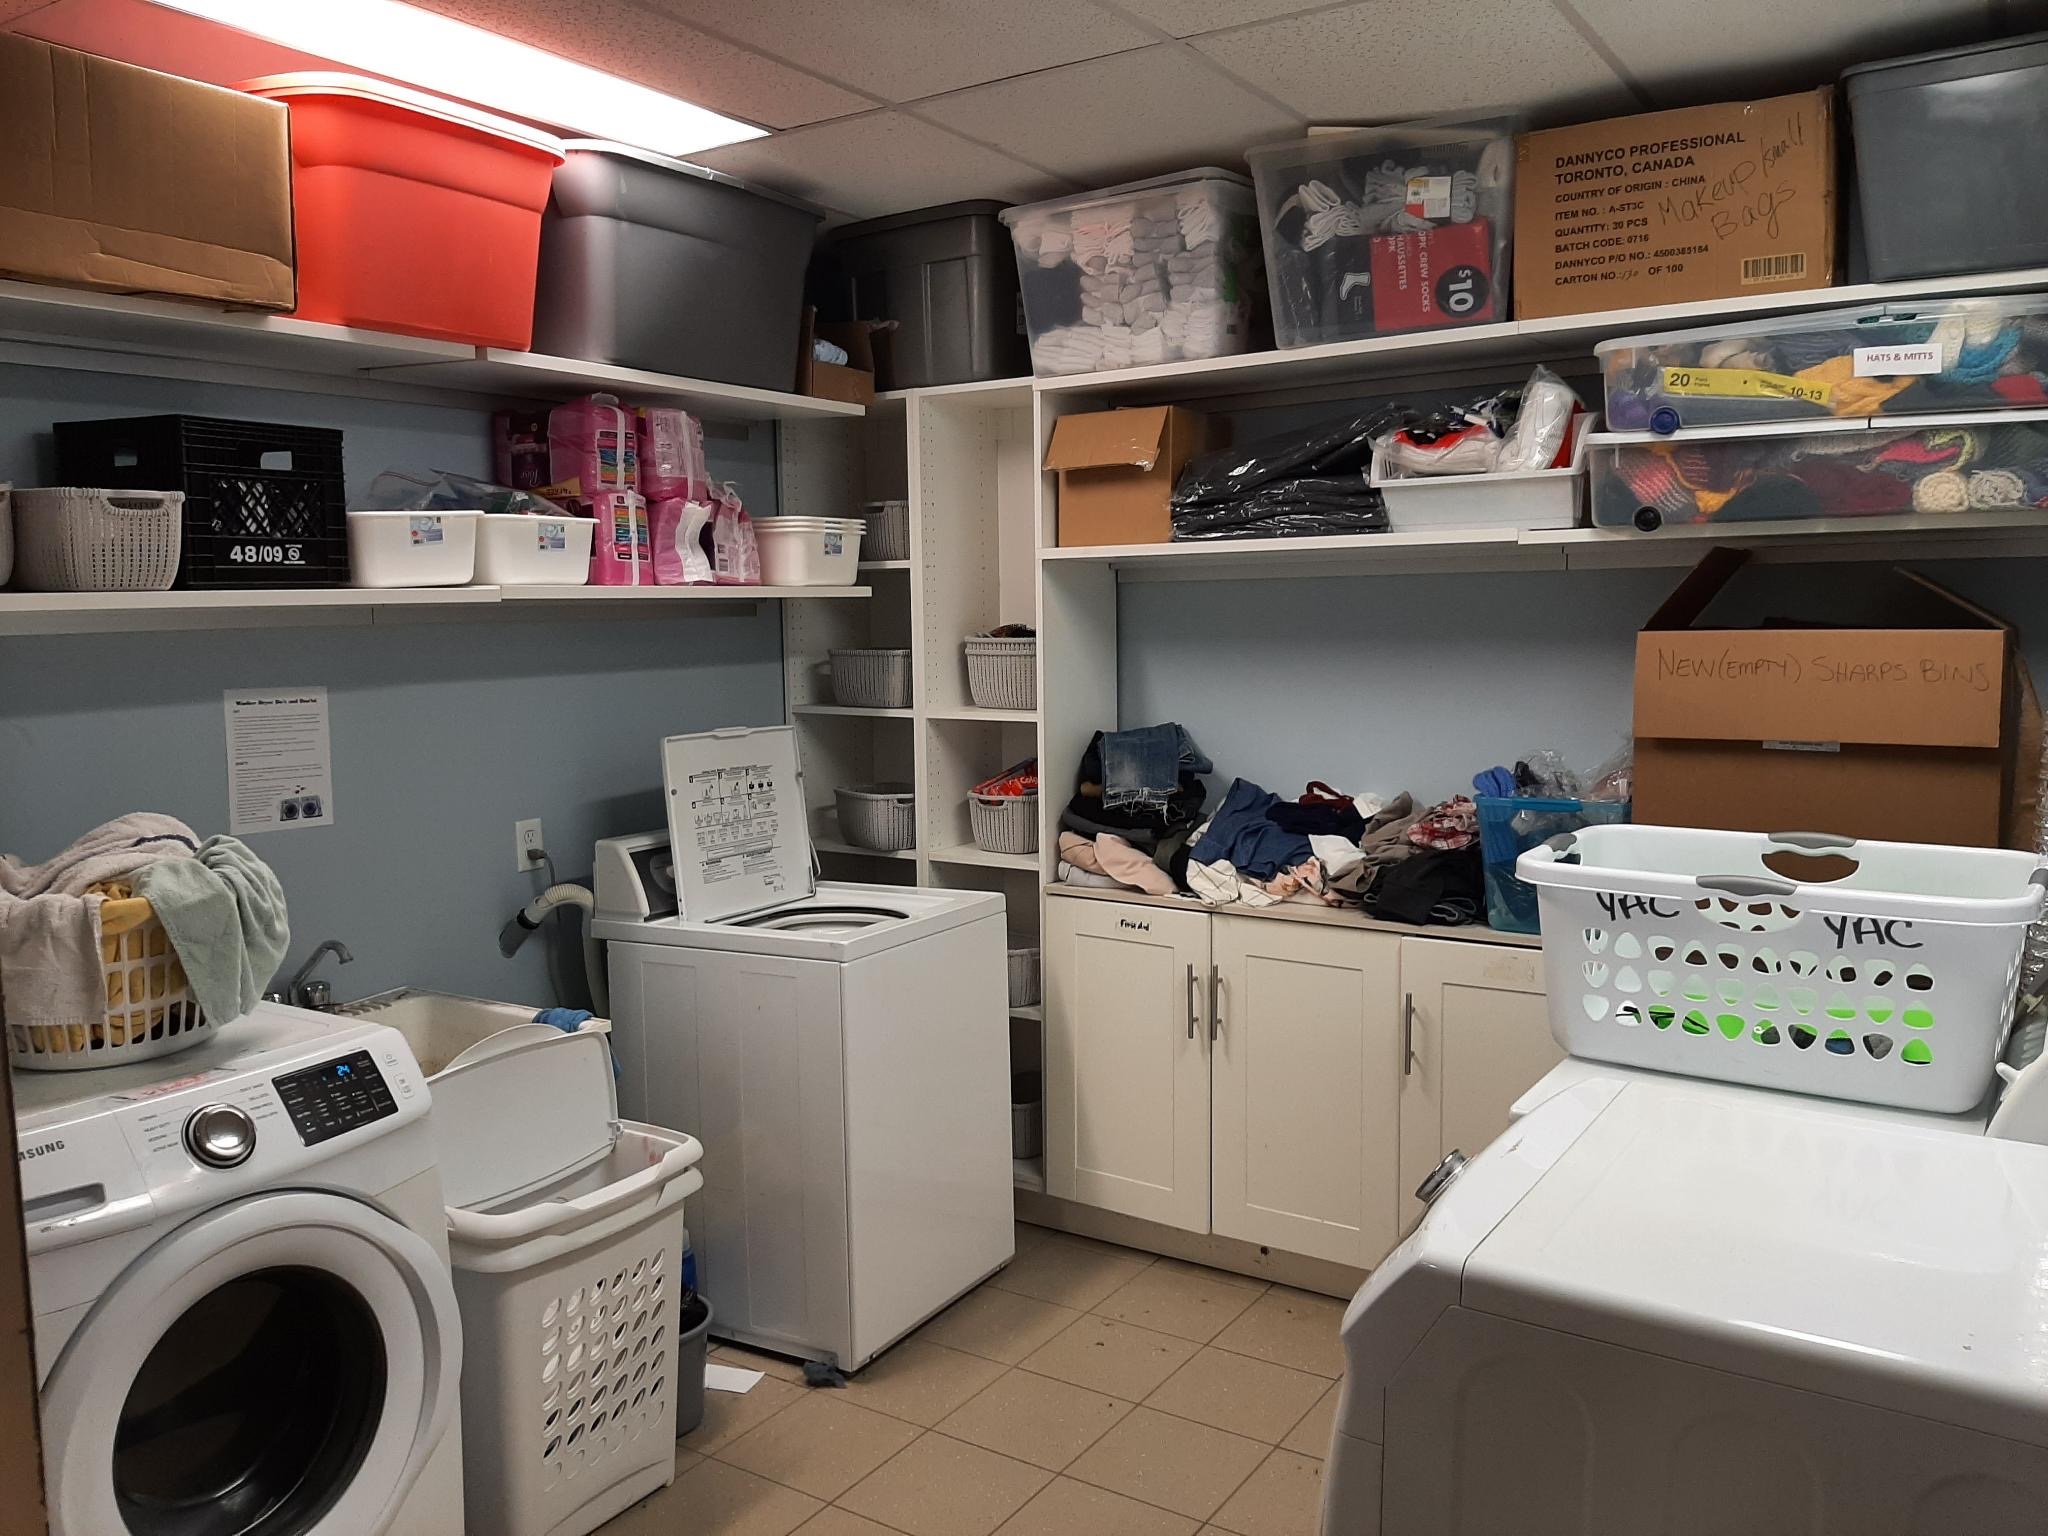 Youth can come into the youth action centre to do their laundry and shower.